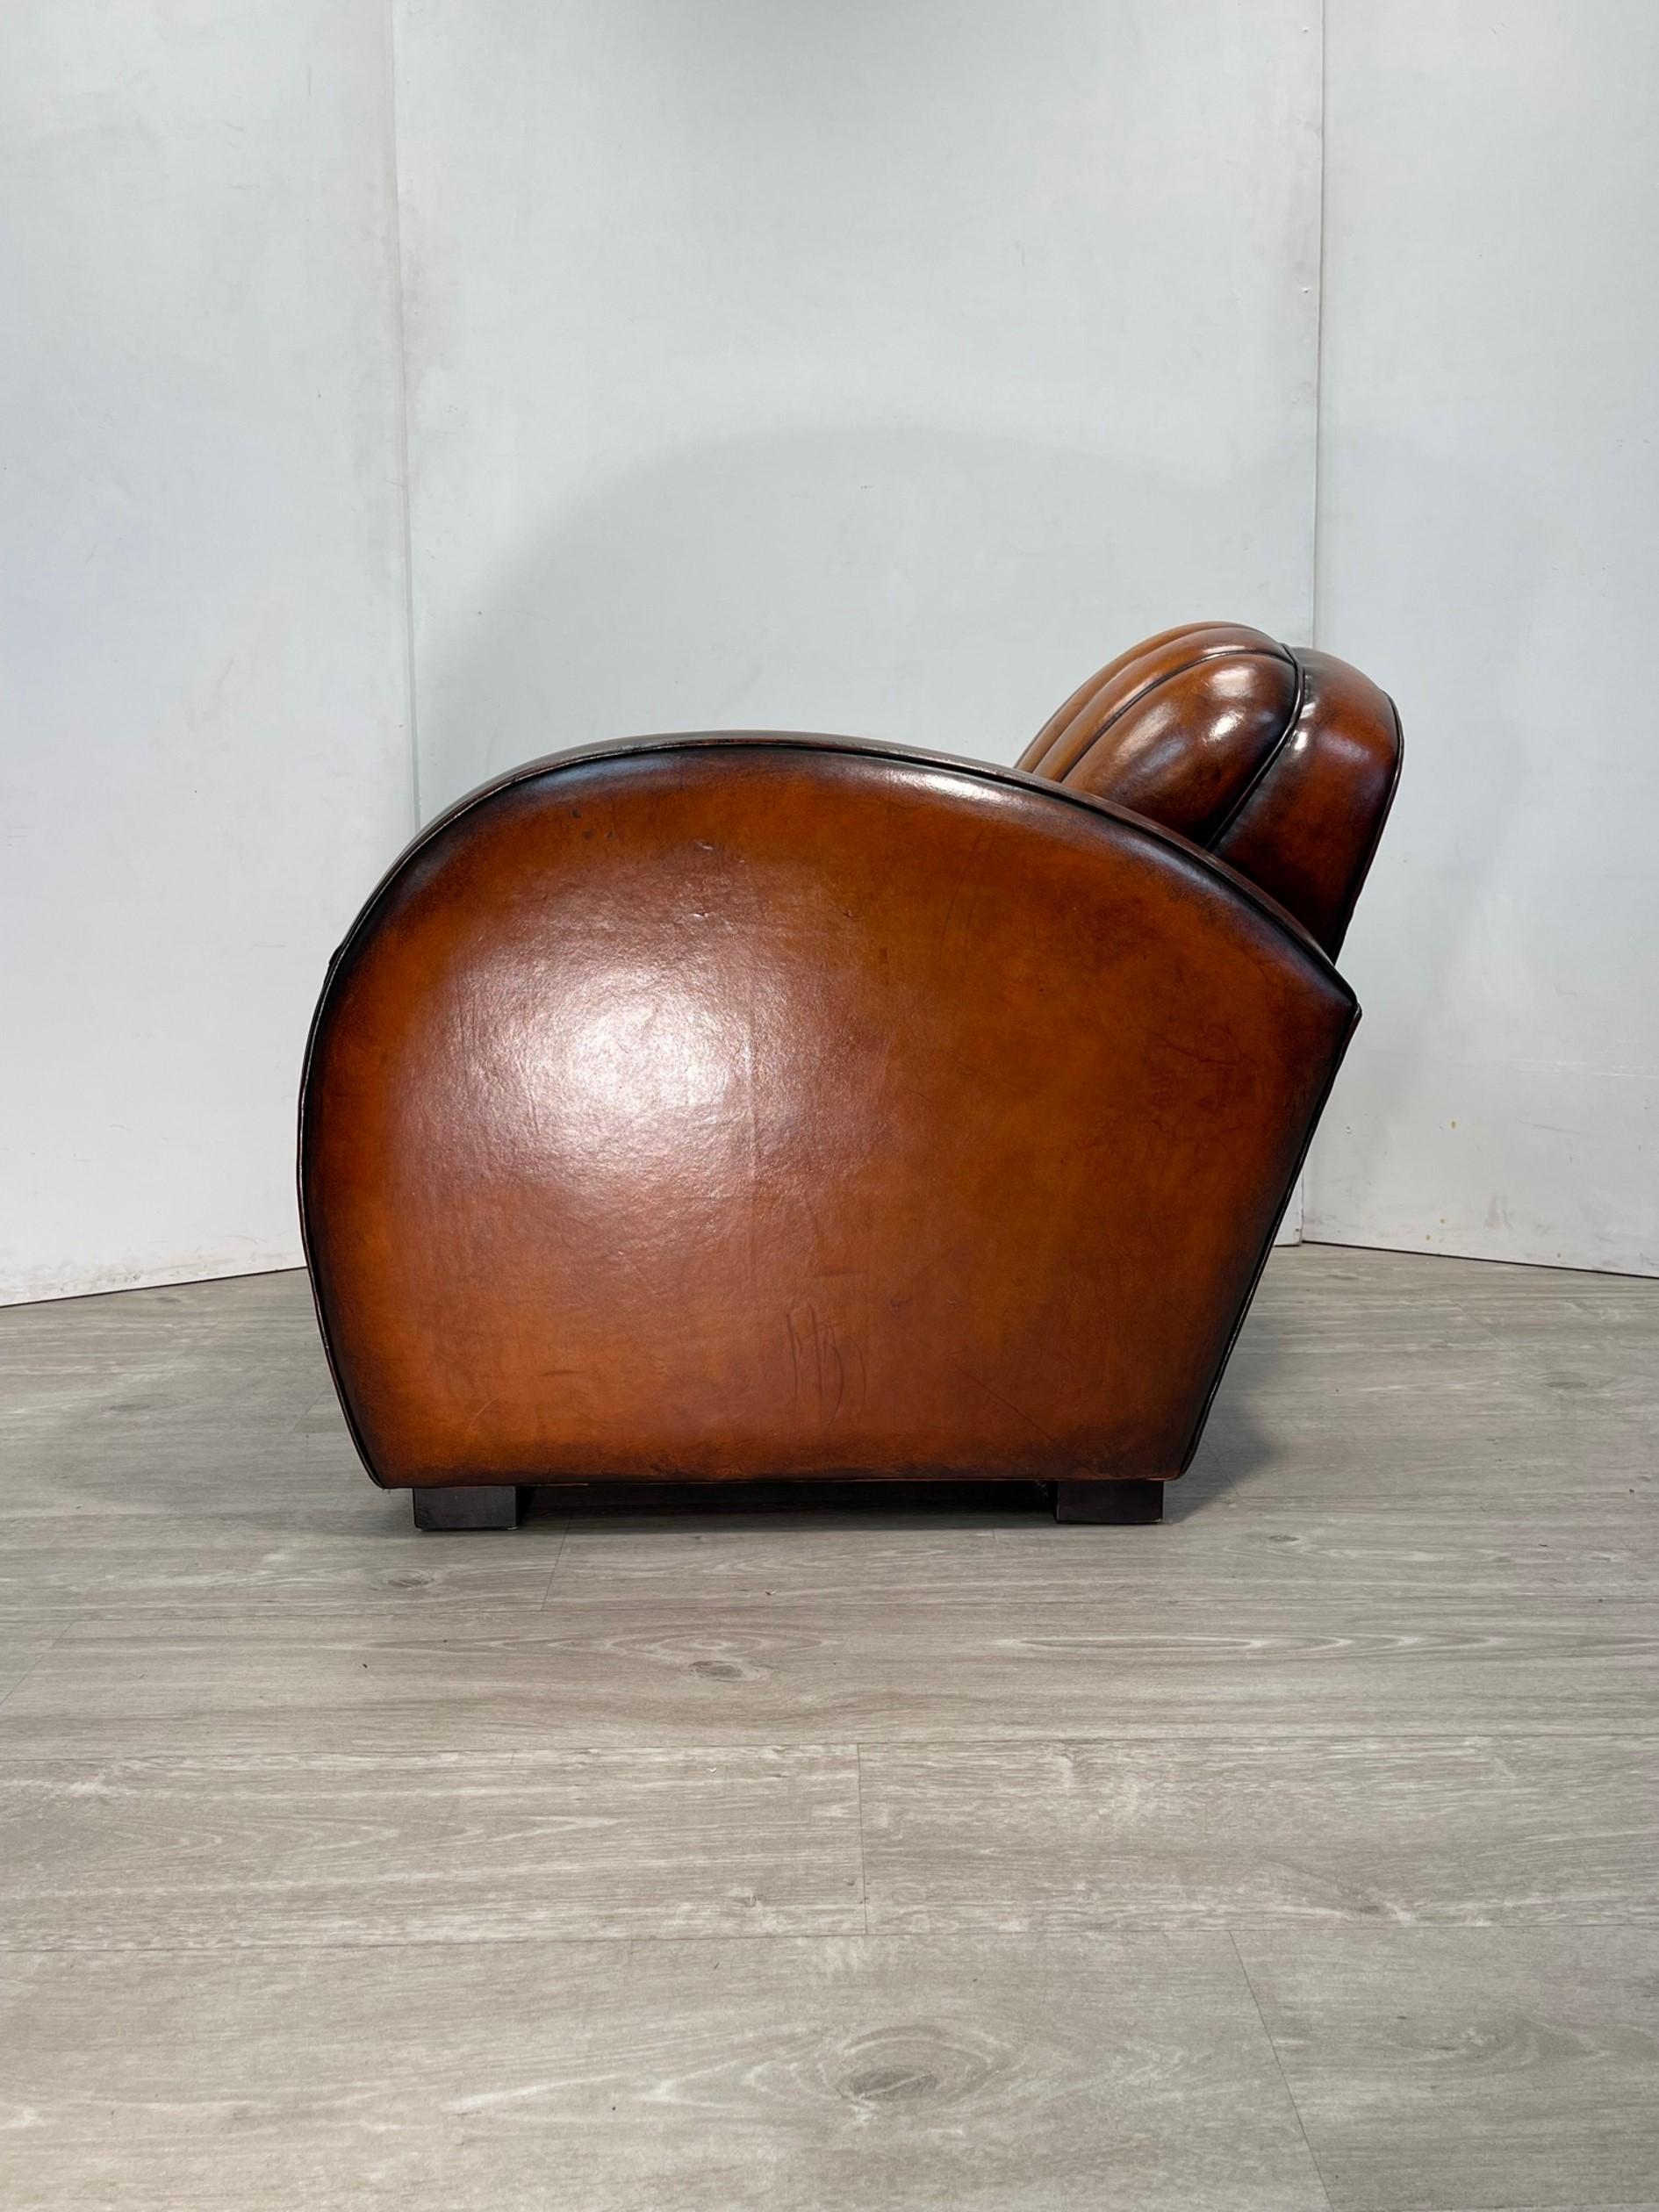 English Rare Vintage Mustang Car Seat Armchair Based on the 1966 Fastback Brown Leather